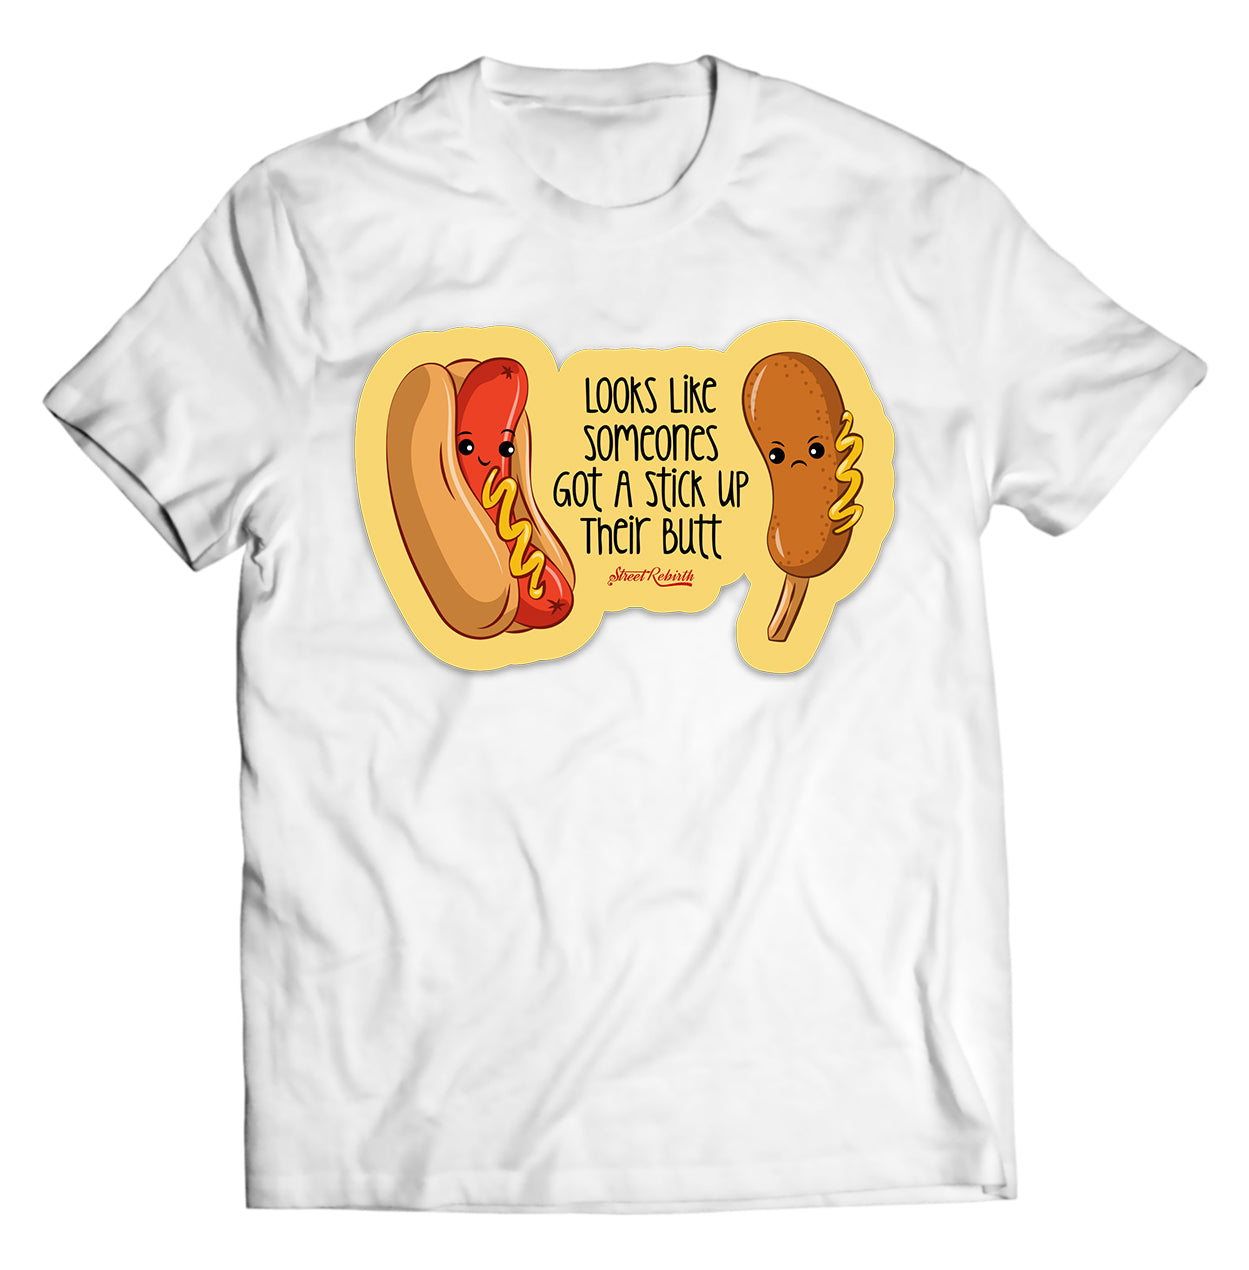 Looks Like Someones Got A Stick Up Their Butt Shirt - Direct To Garment Quality Print - Unisex Shirt - Gift For Him or Her